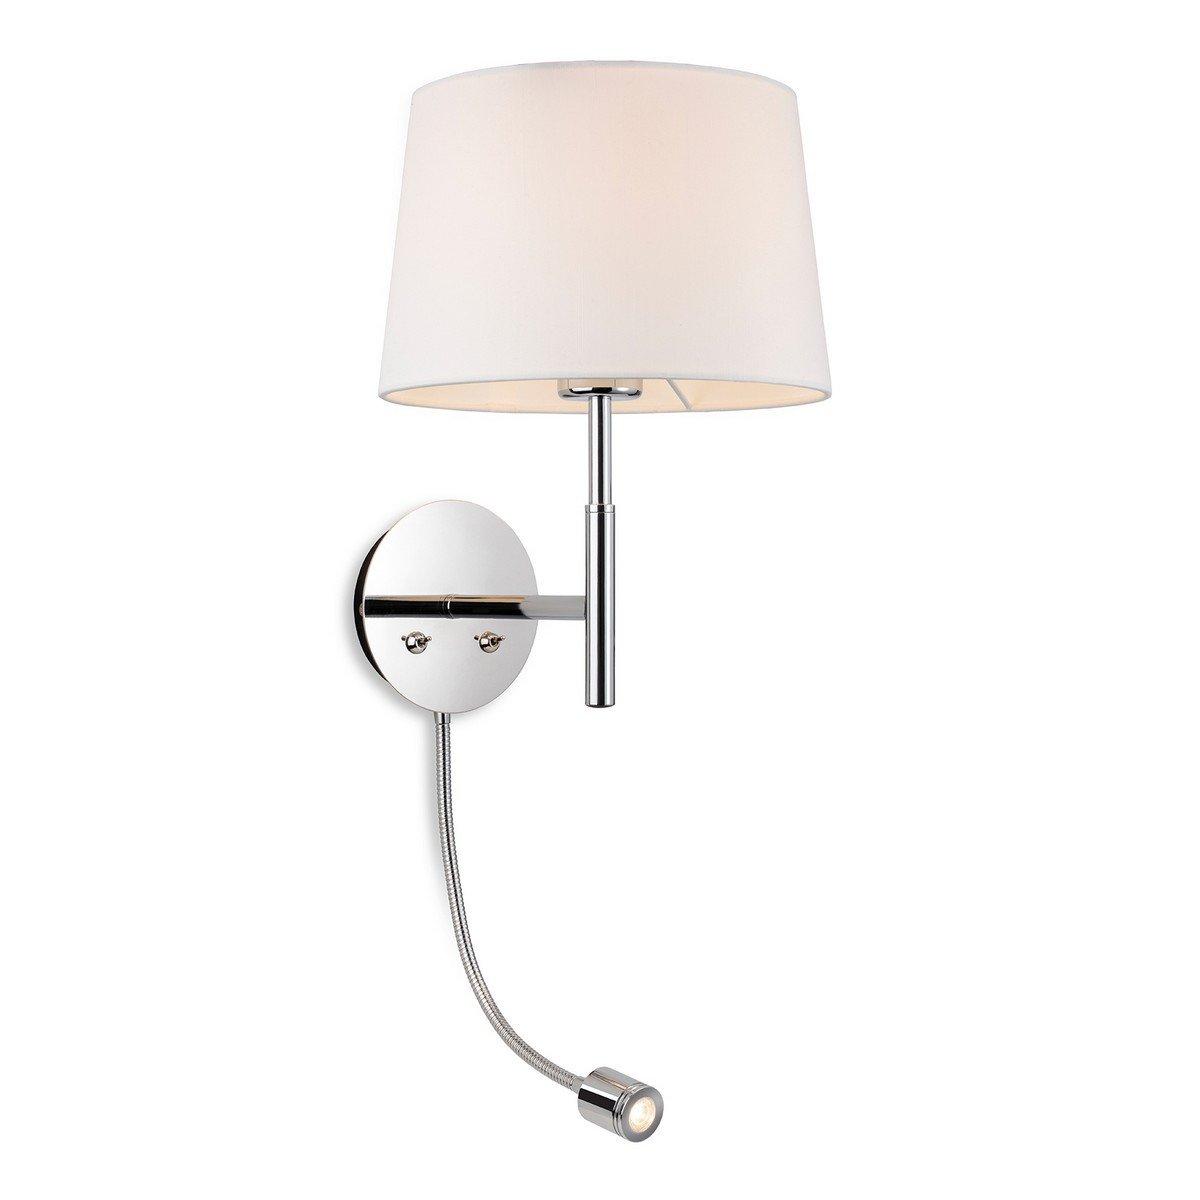 Seymour Classic Switched Wall Lamp with Adjustable Reading Light Chrome with Cream Shade